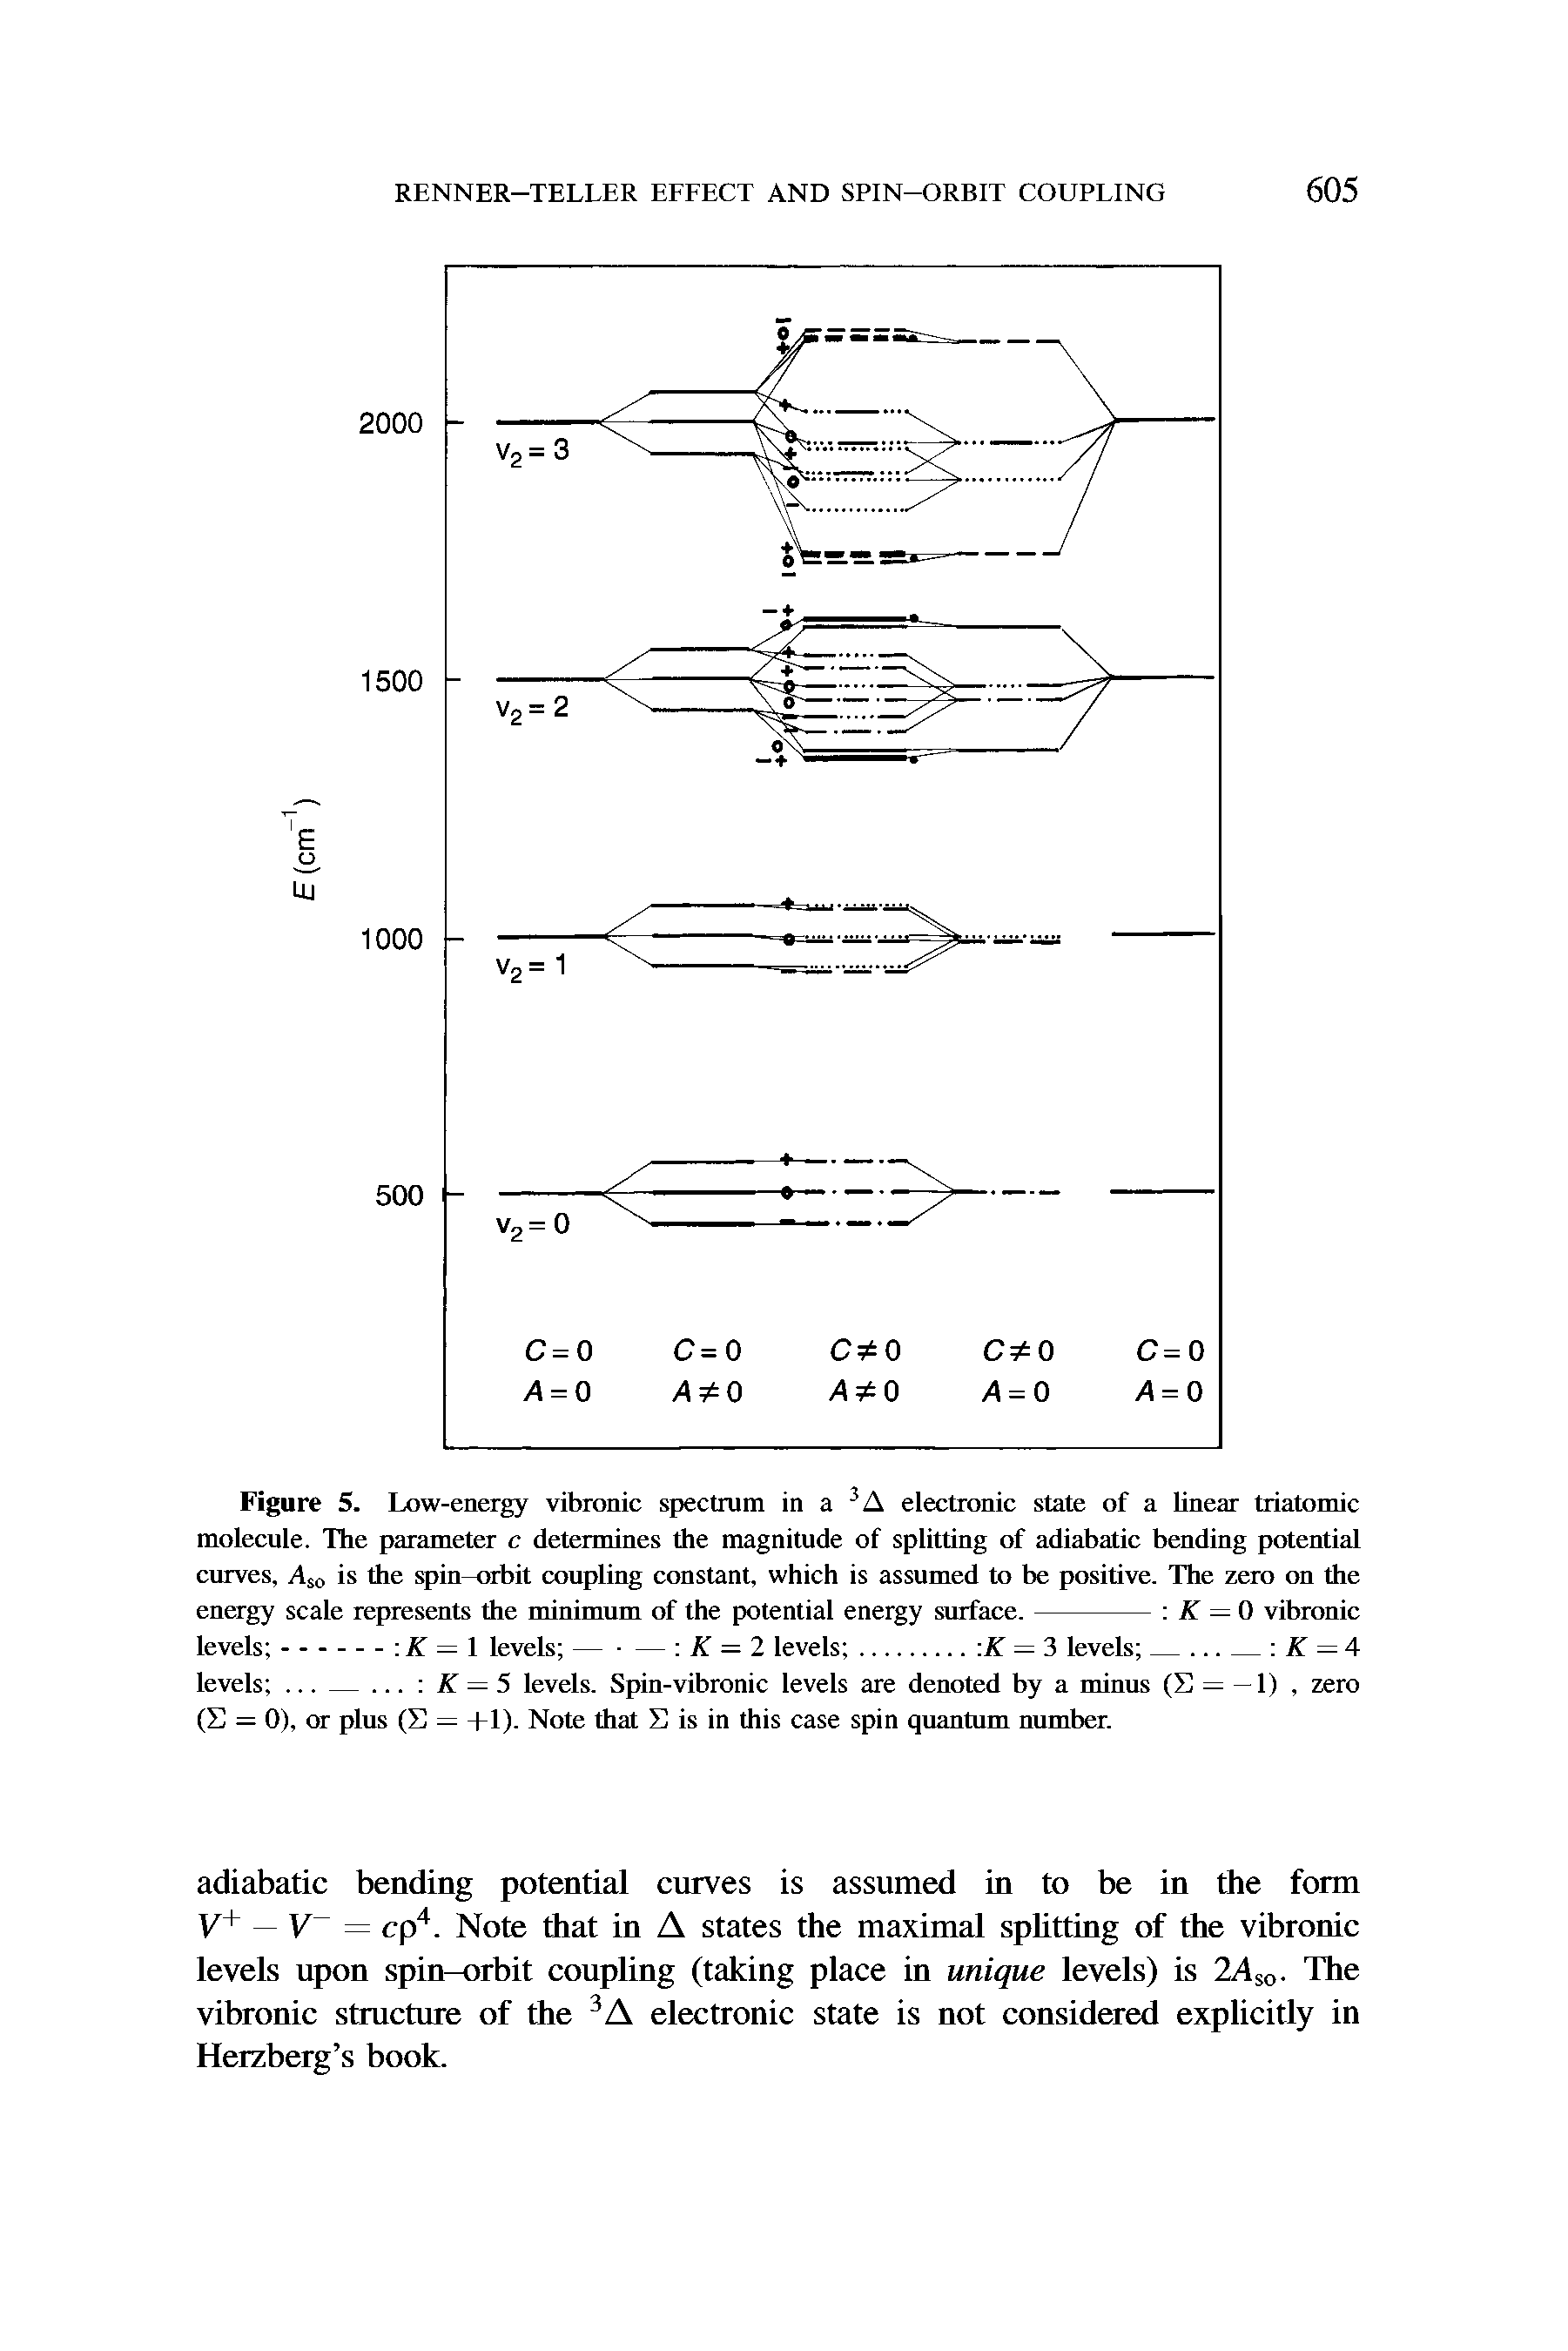 Figure 5. Low-energy vibronic spectrum in a 3 A electronic state of a linear triatomic molecule. The parameter c determines the magnitude of splitting of adiabatic bending potential curves, As0 is the spin-orbit coupling constant, which is assumed to be positive. The zero on the...